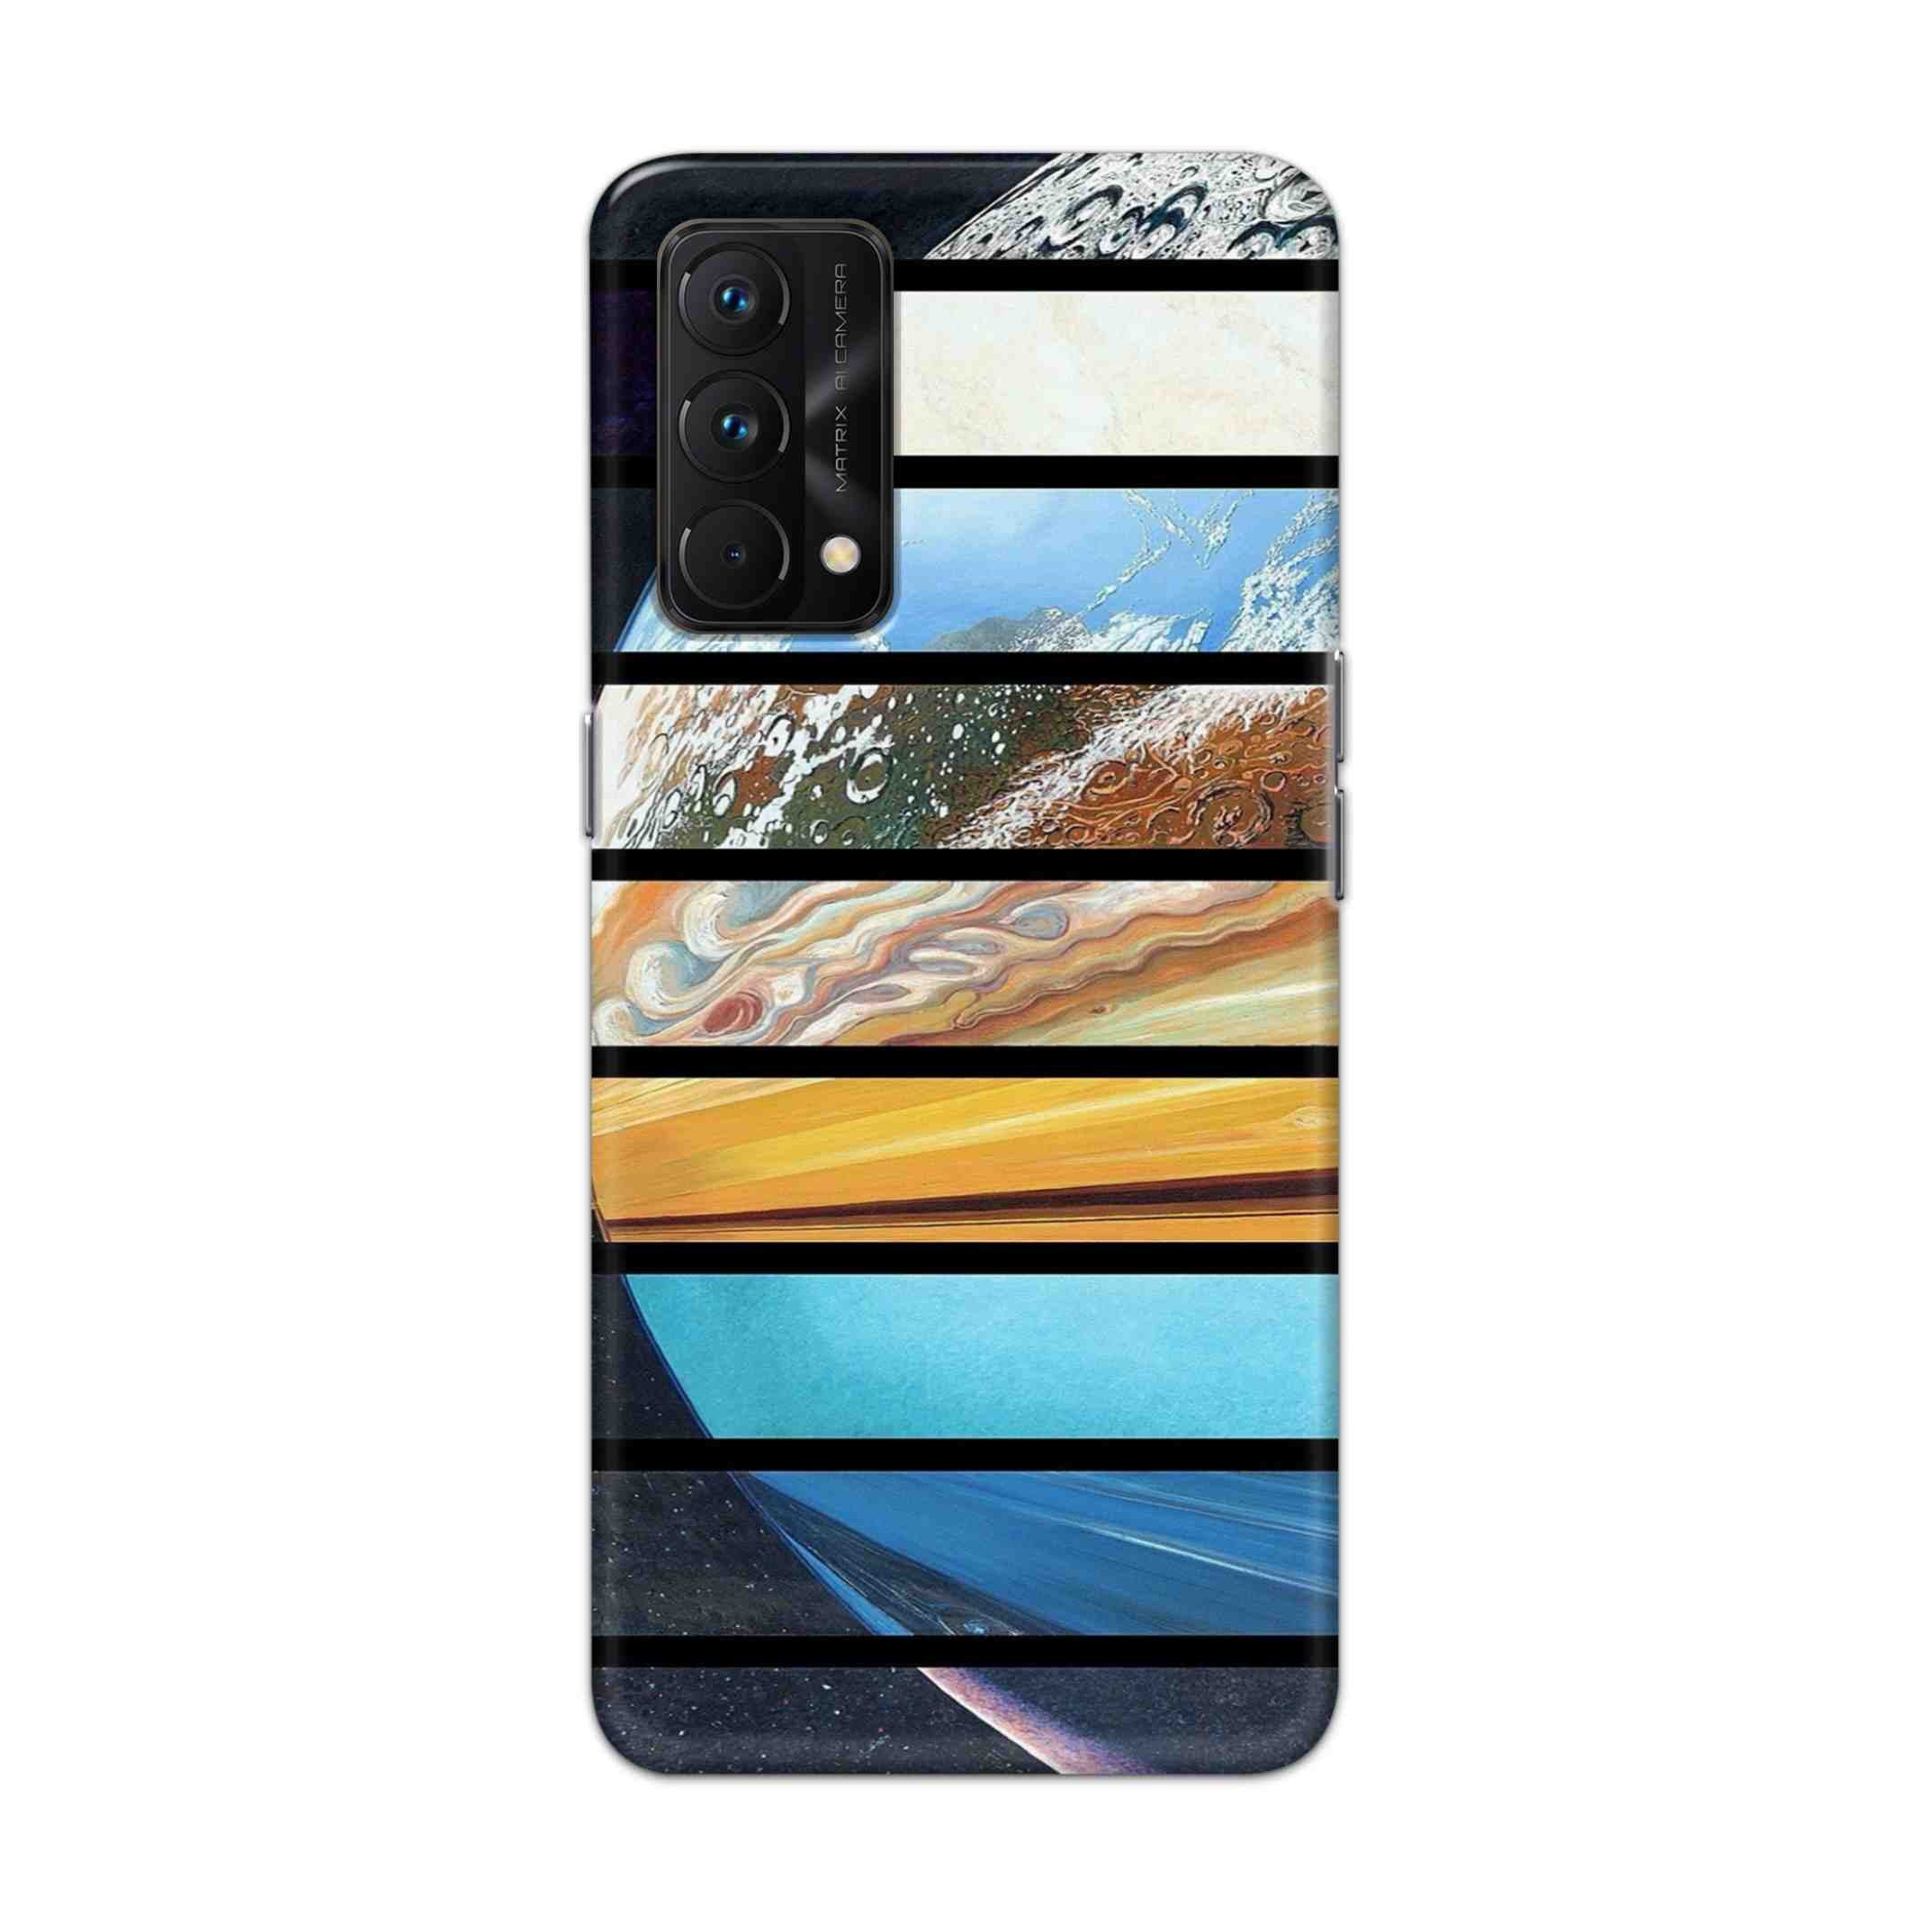 Buy Colourful Earth Hard Back Mobile Phone Case Cover For Realme GT Master Online